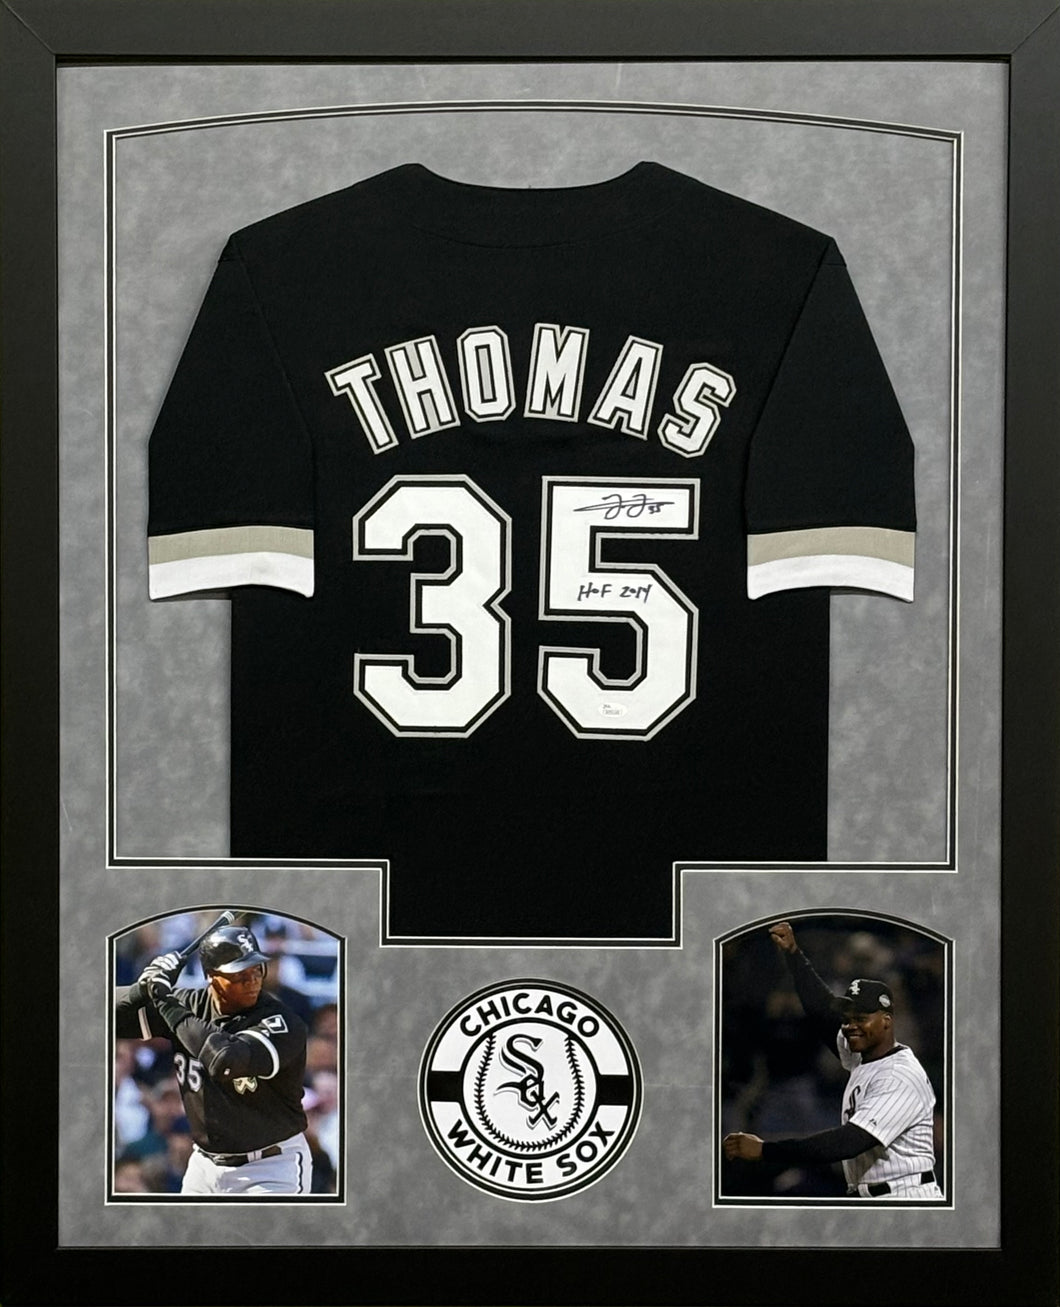 Chicago White Sox Frank Thomas Signed Black Jersey with HOF 2014 Inscription with JSA COA